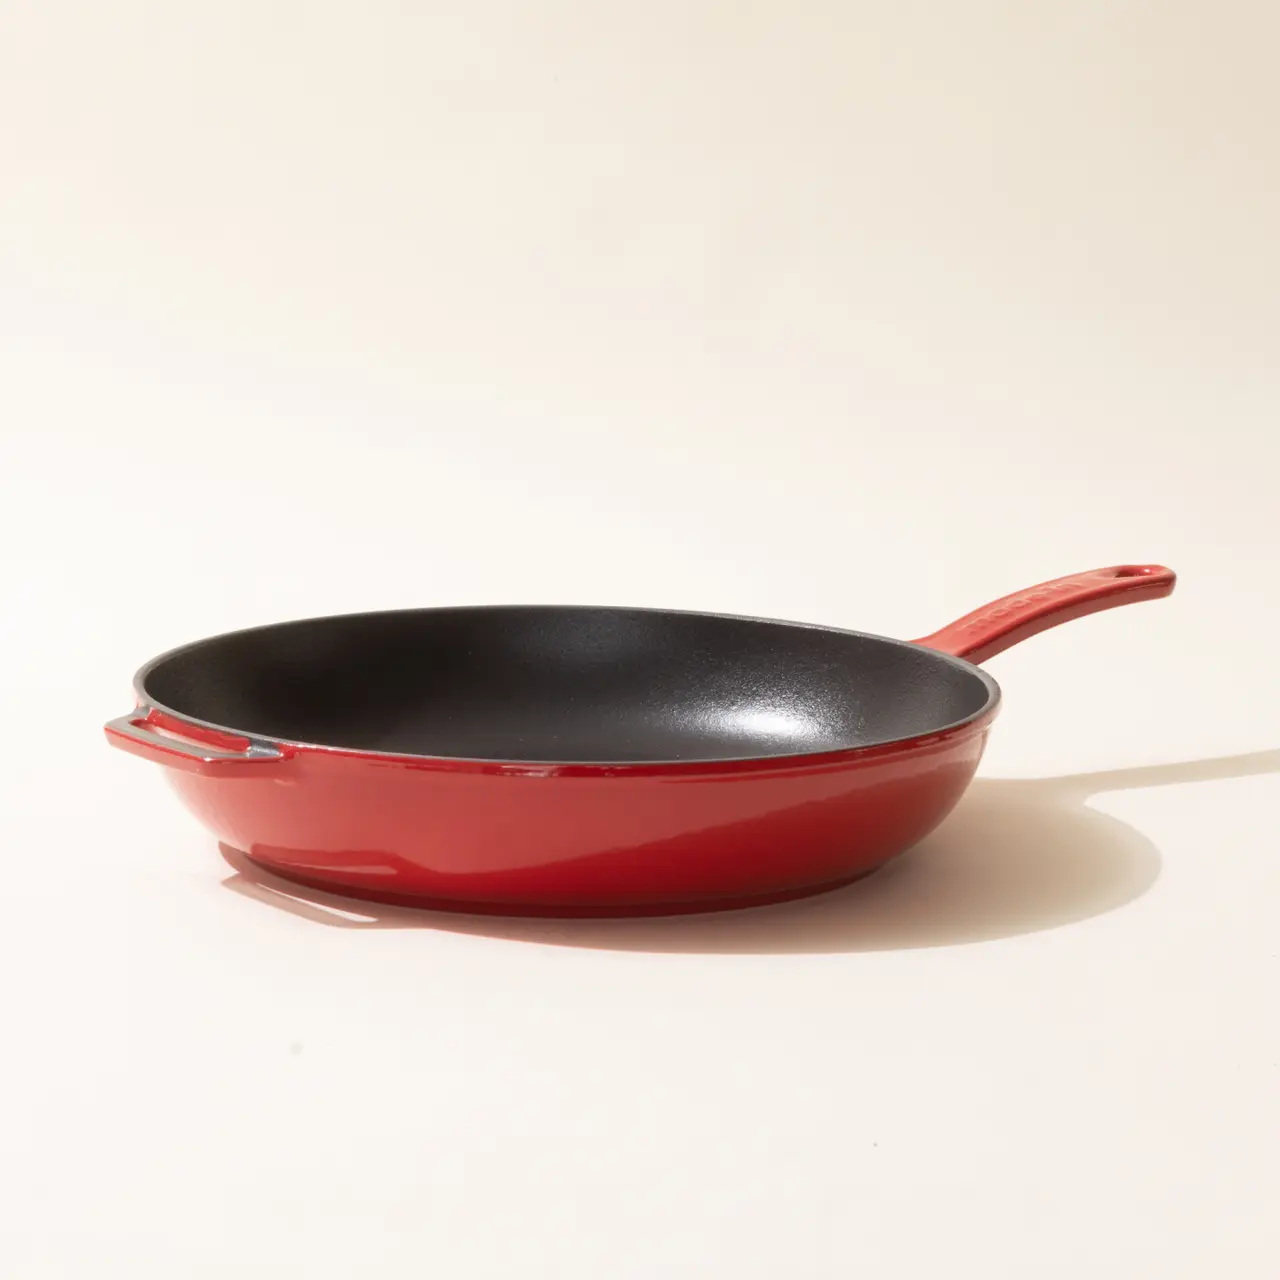 cast iron skillet made in red